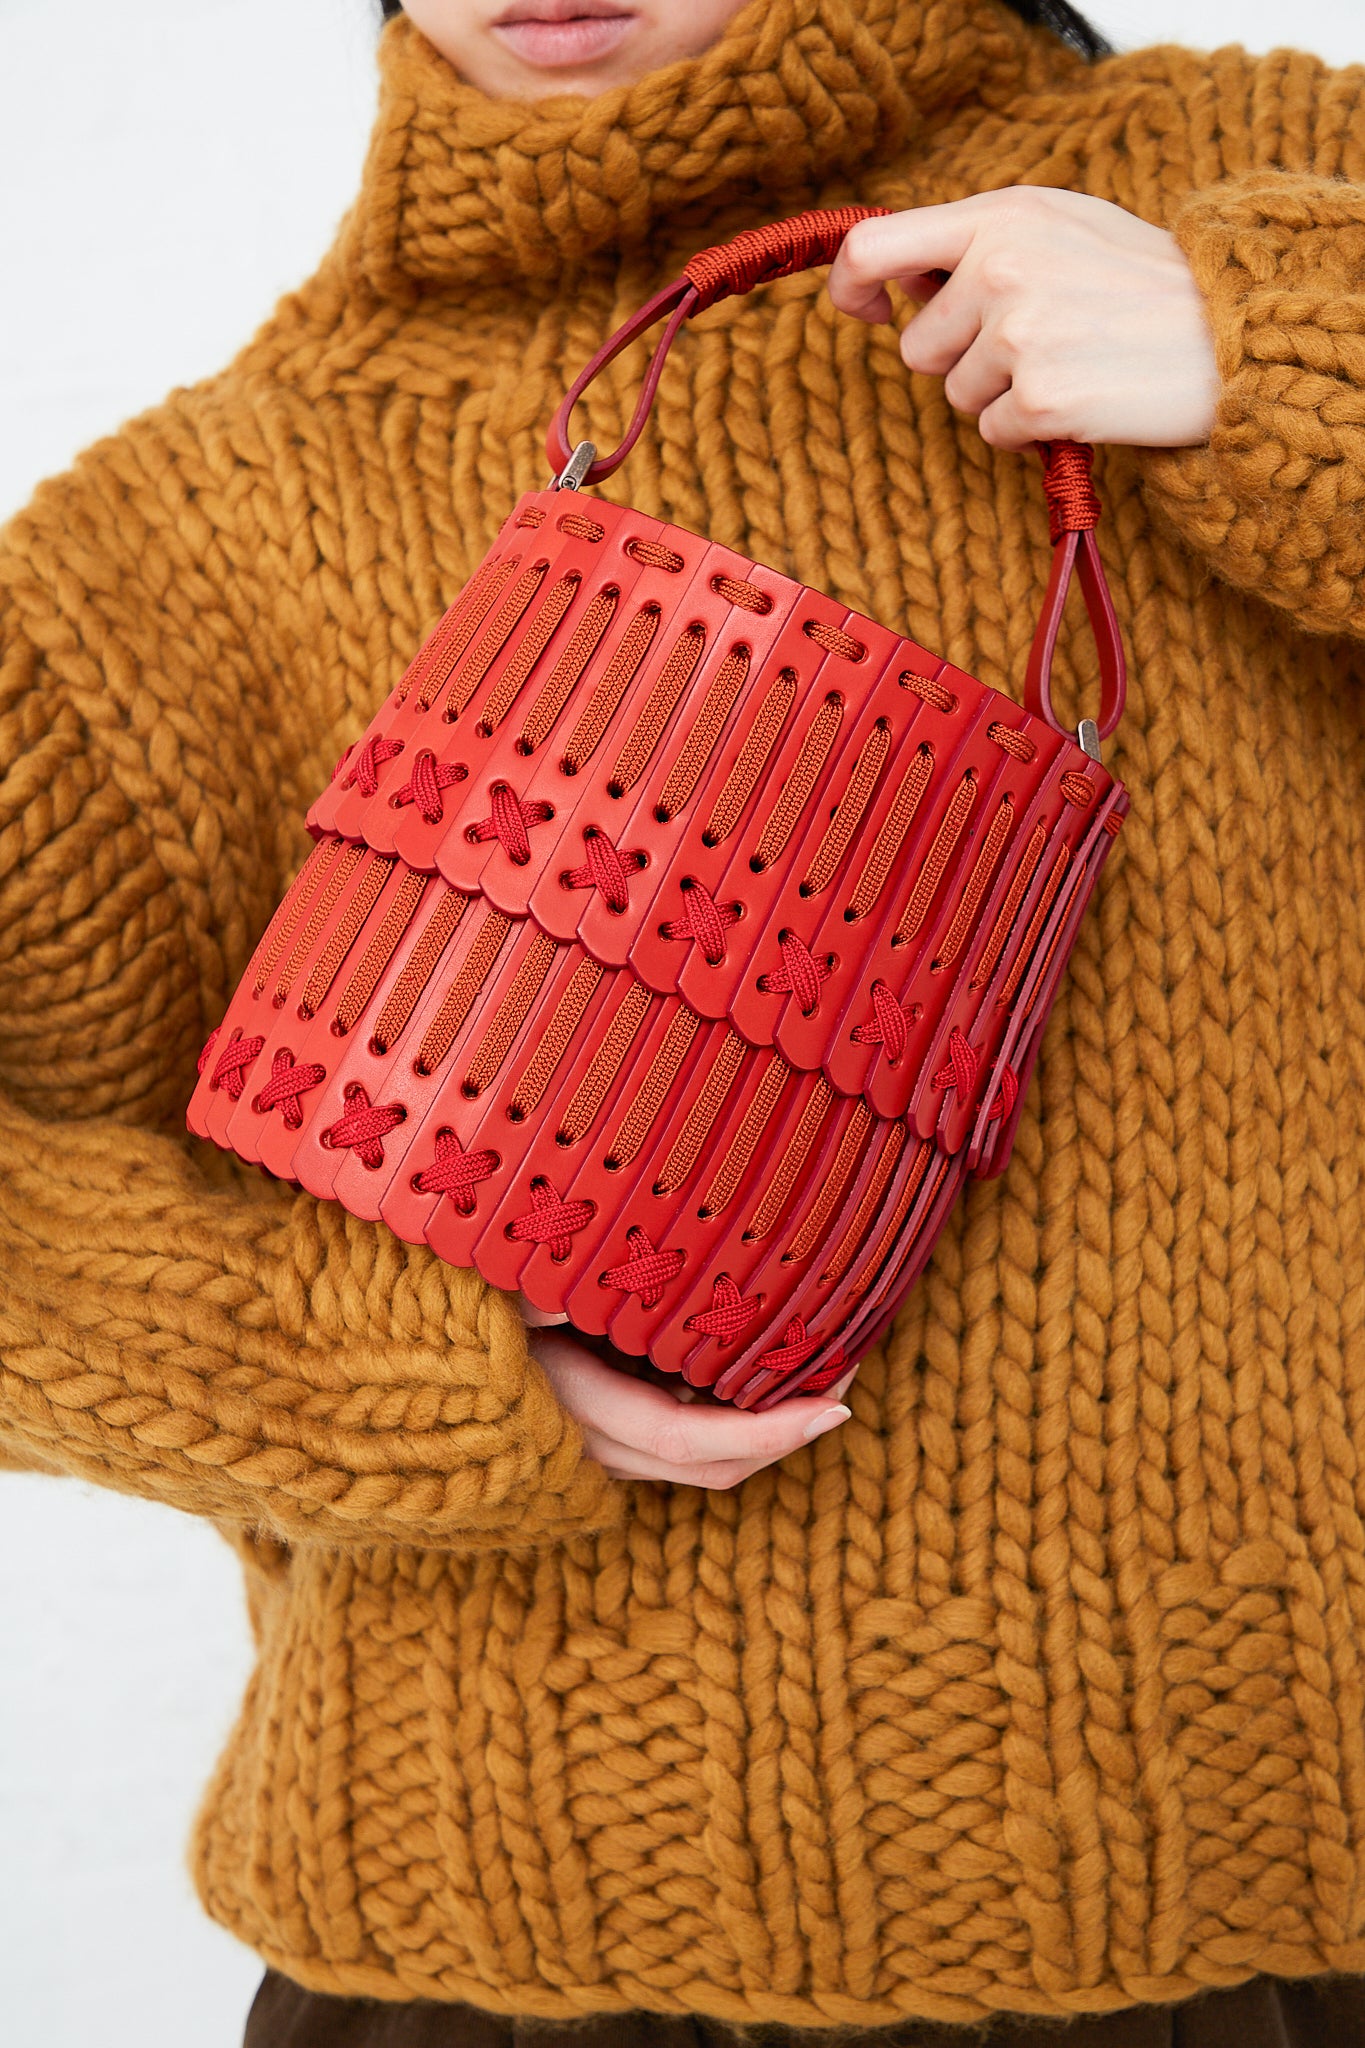 A woman is holding a Hatori Bucket Bag 80 in Amaranto, Cherry and Tangerine.